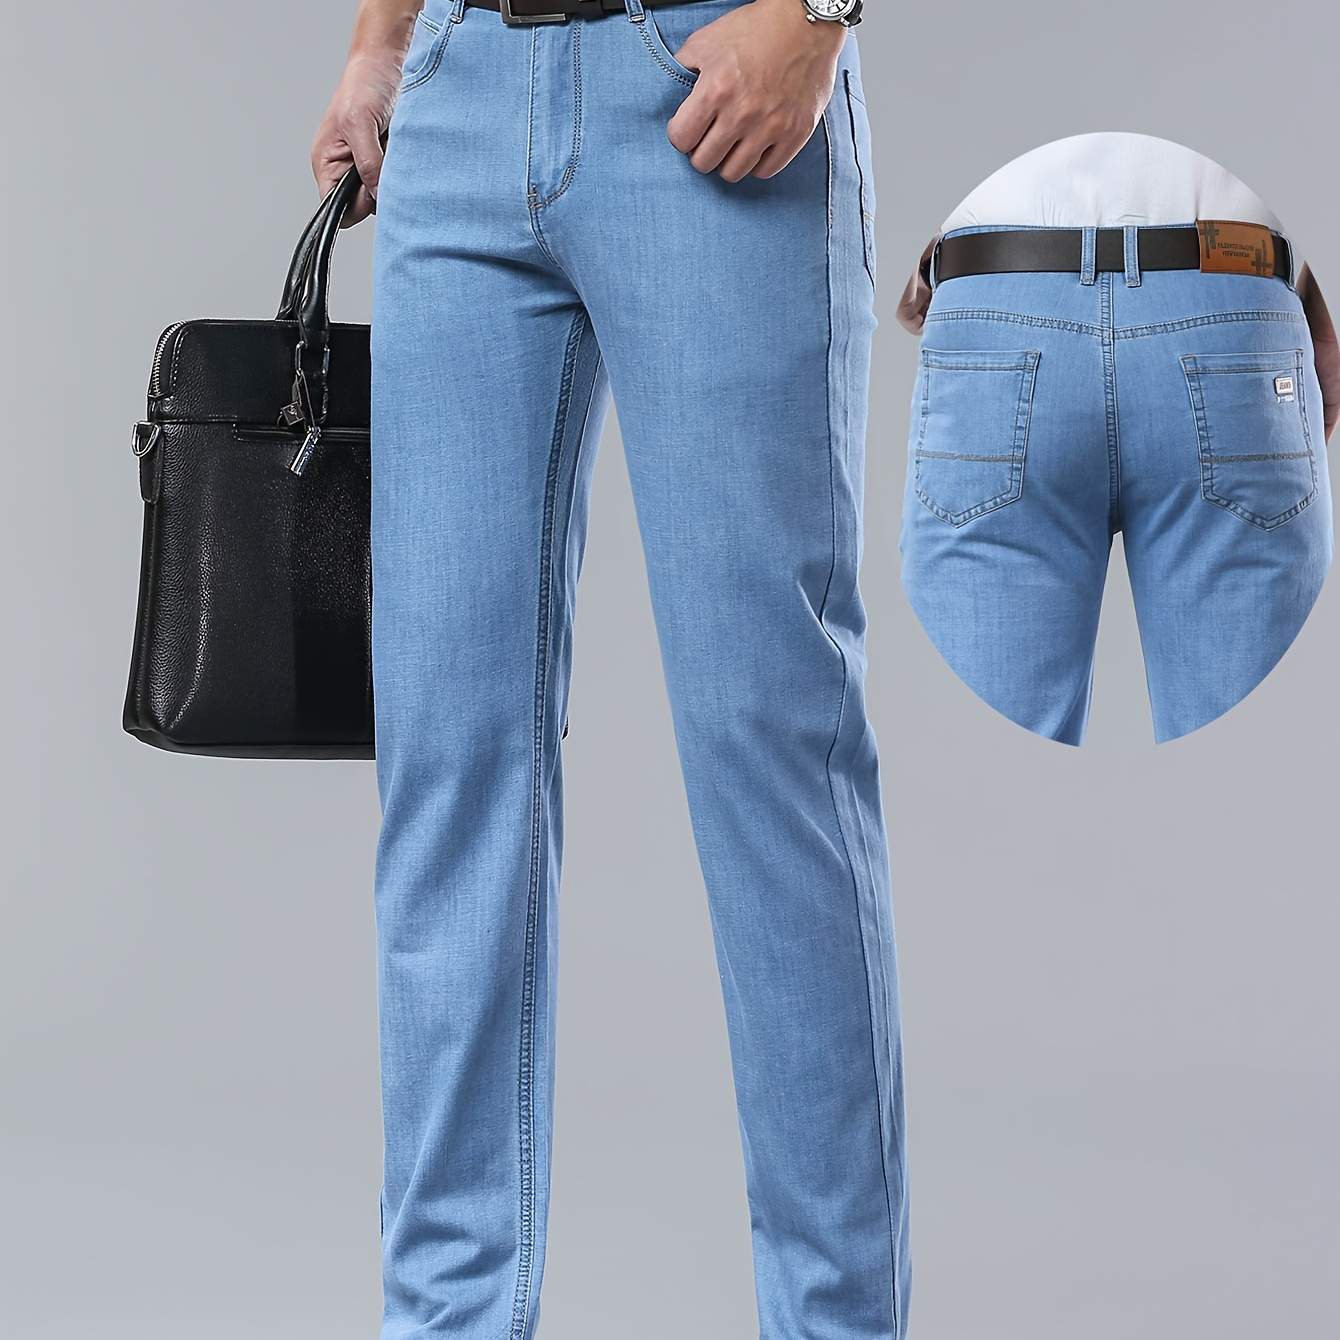 

Men's Solid Washed Denim Pants With Pockets, Formal Cotton Blend Thin Barrel Jeans For Summer Outdoor Activities Gift